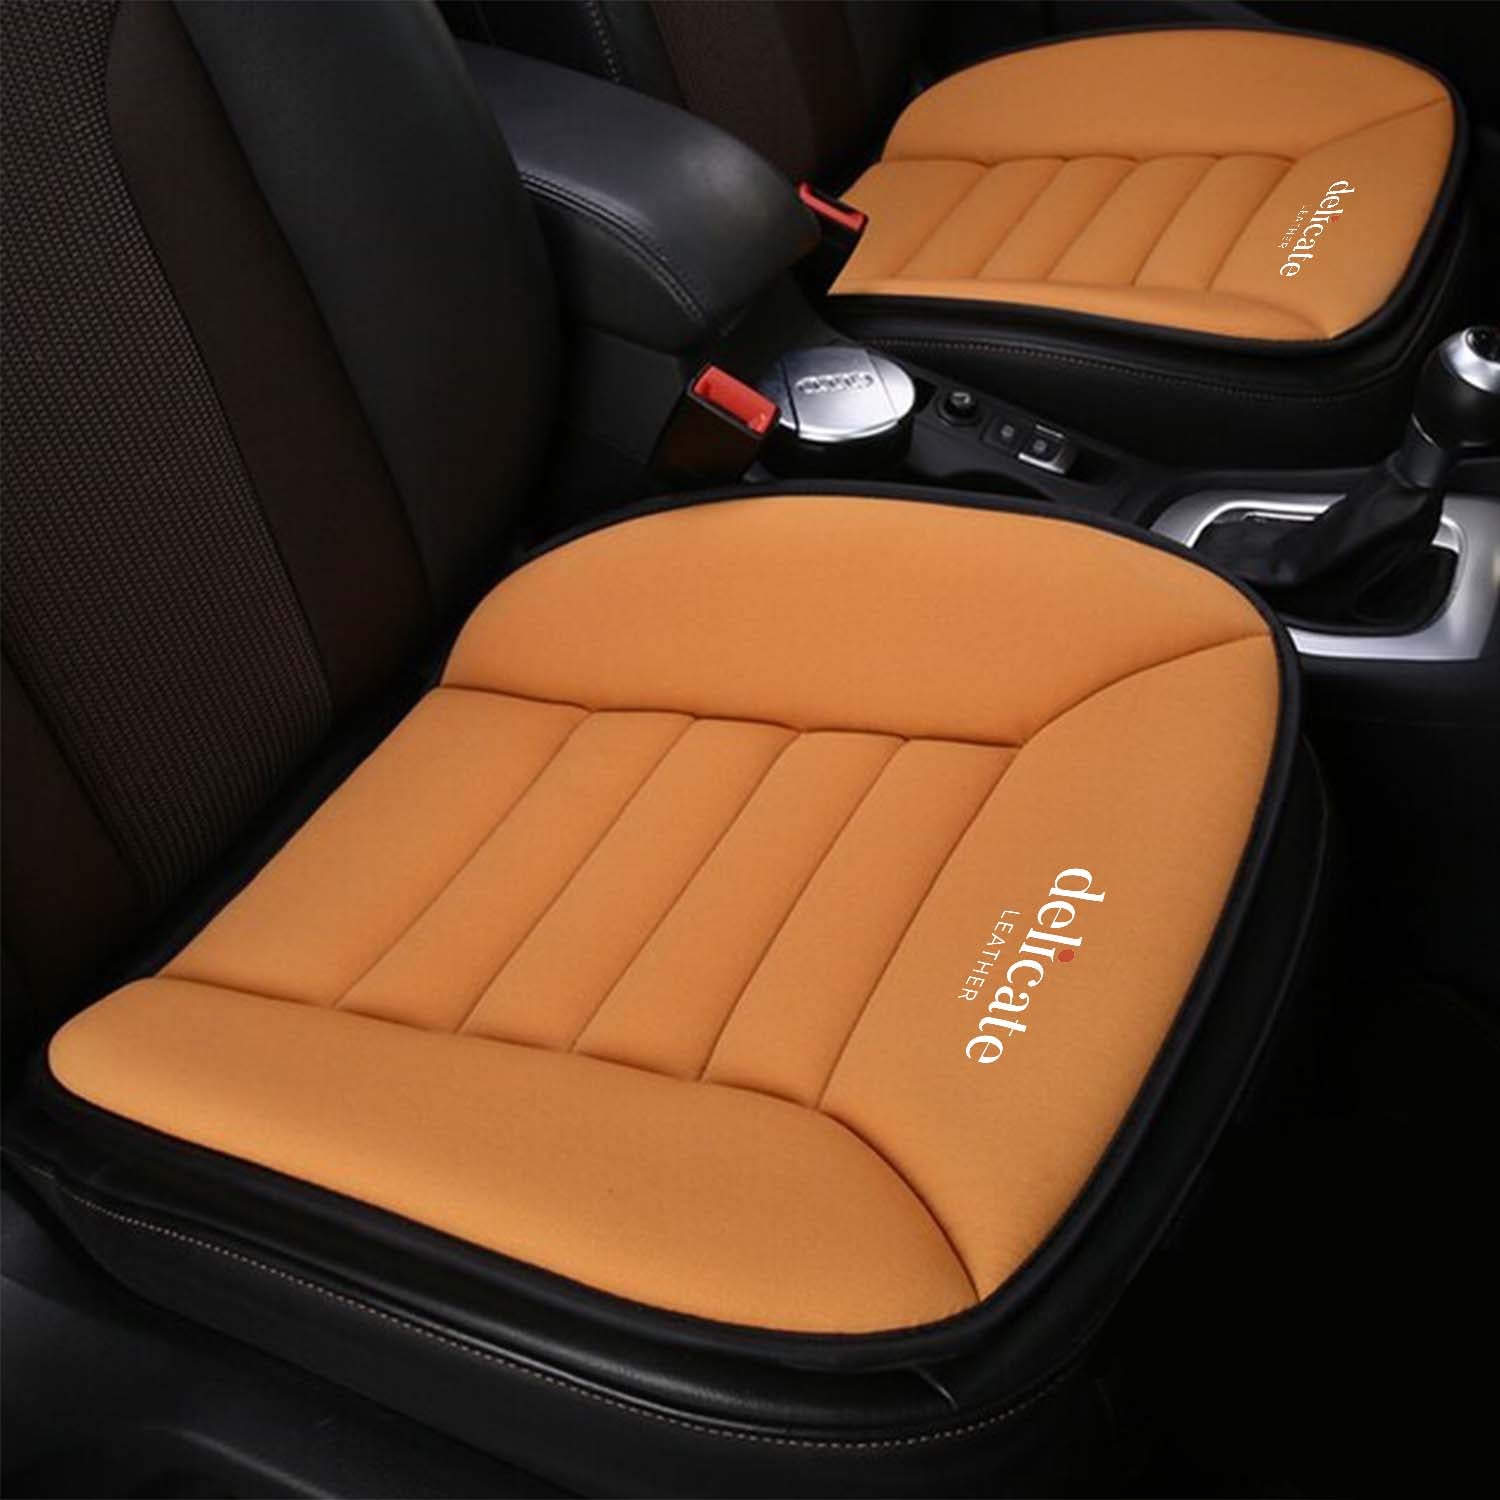 Ford Car Seat Cushion: Enhance Comfort and Support for Your Drive